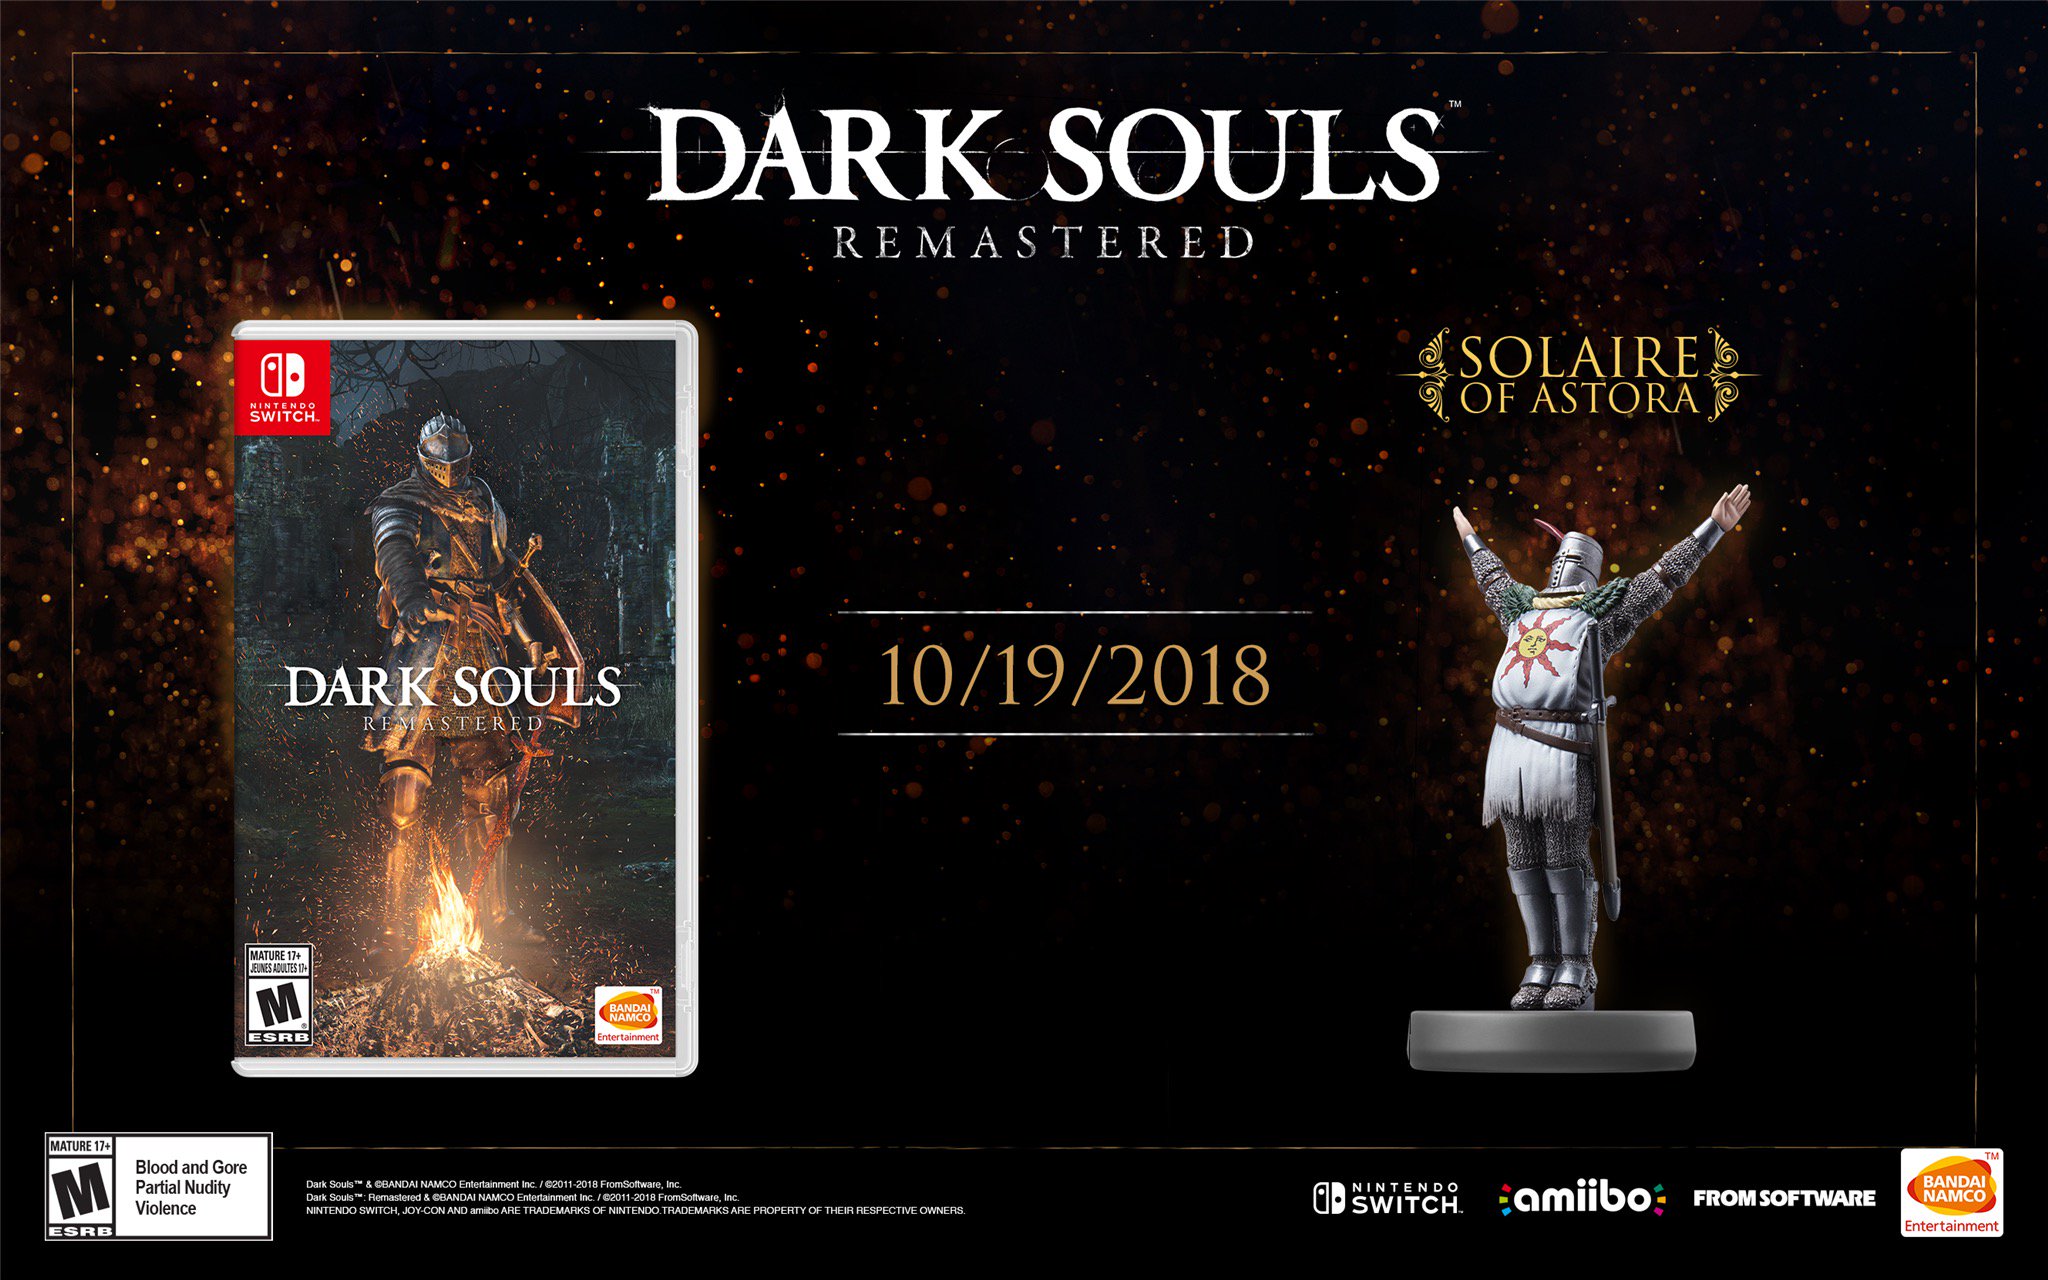 Bandai US on Twitter: "Praise The Sun! DARK SOULS: Remastered for #NintendoSwitch and the of Astora amiibo will launch on Oct. 19th! Journey Lordran and experience the groundbreaking